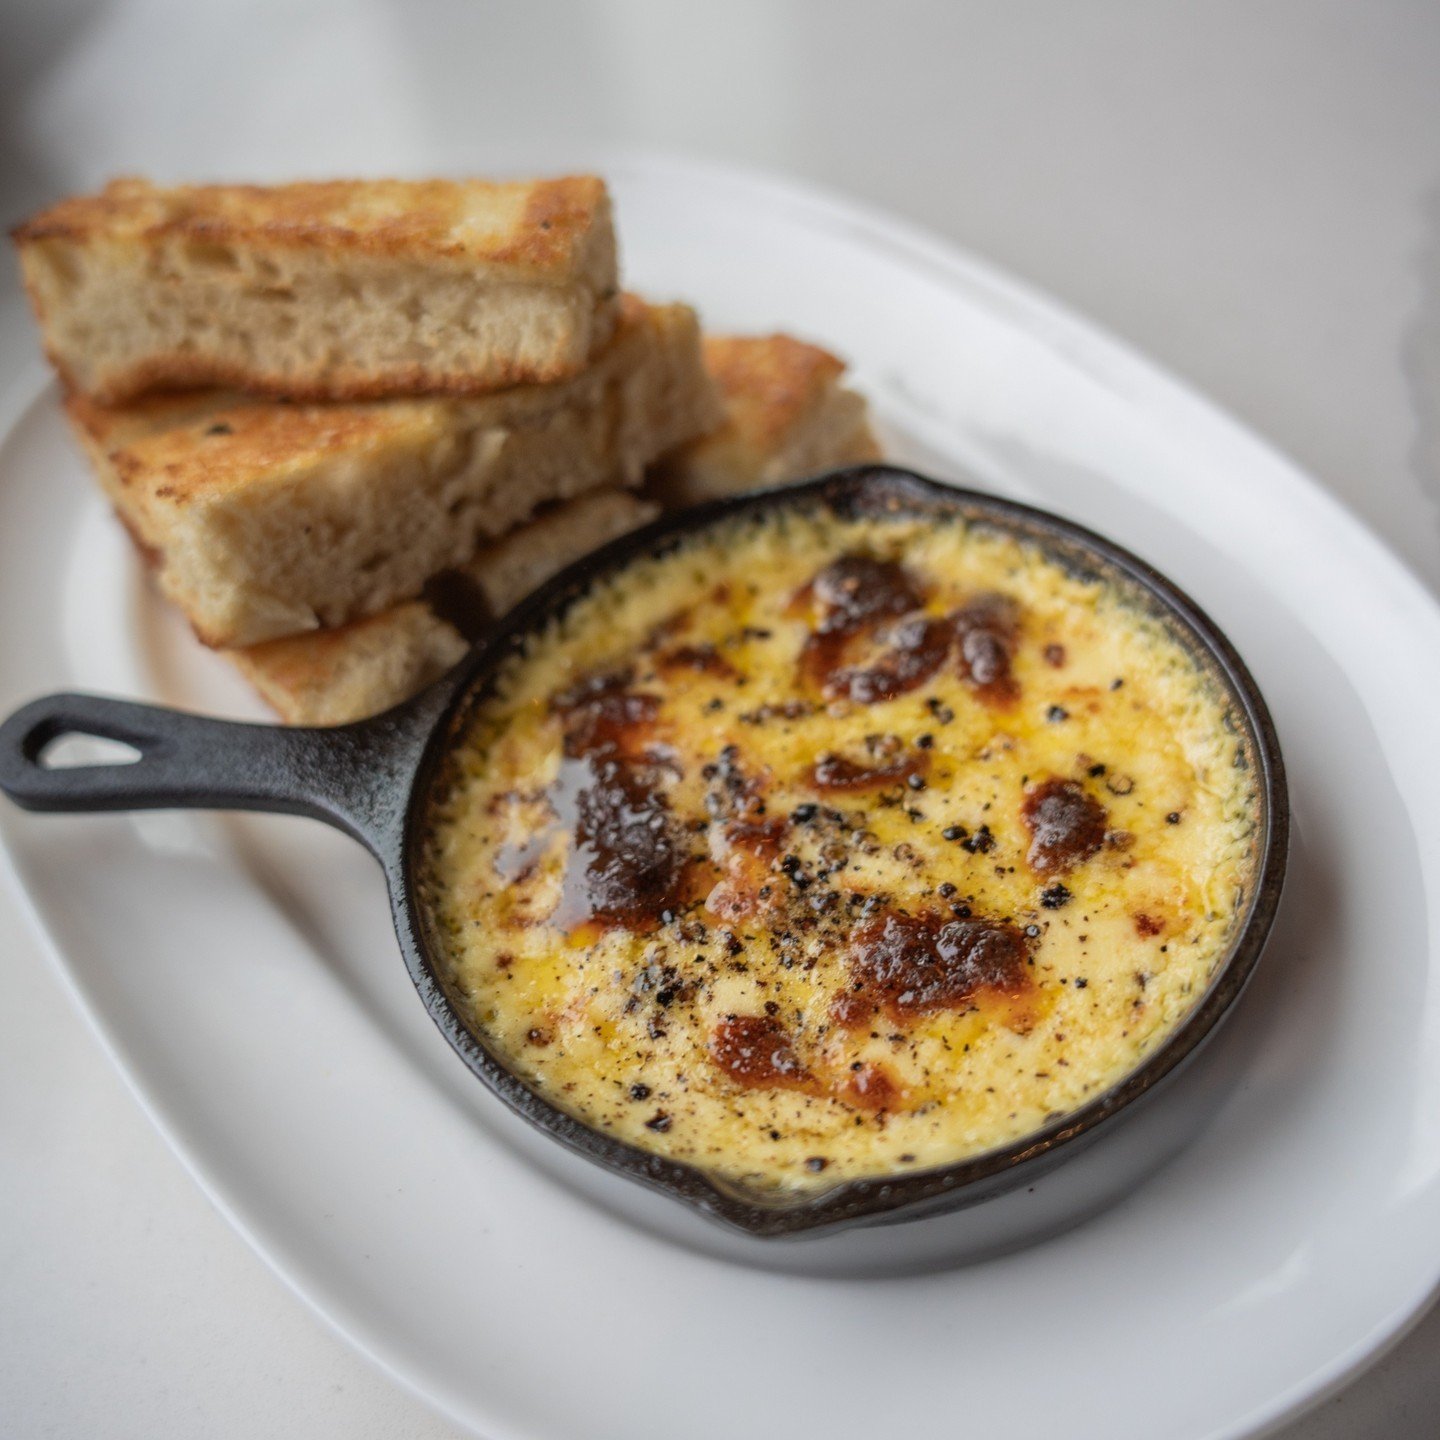 Hungry? We've got something to set your mind at cheese. 🧀 Tag a friend below 👇 that you want to share our Cast Iron Fonduta with.